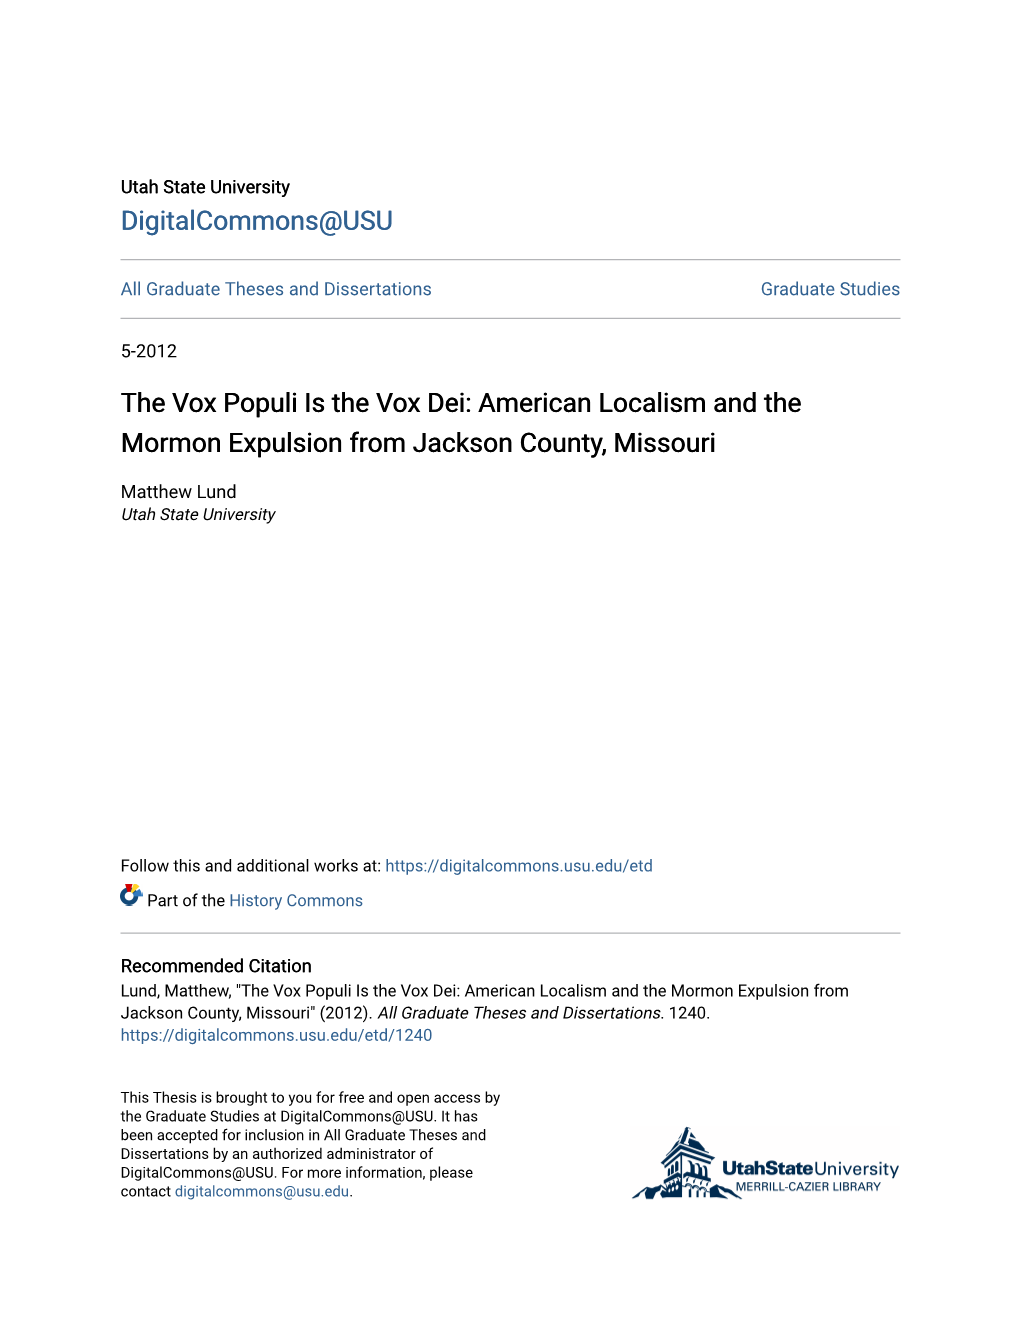 The Vox Populi Is the Vox Dei: American Localism and the Mormon Expulsion from Jackson County, Missouri